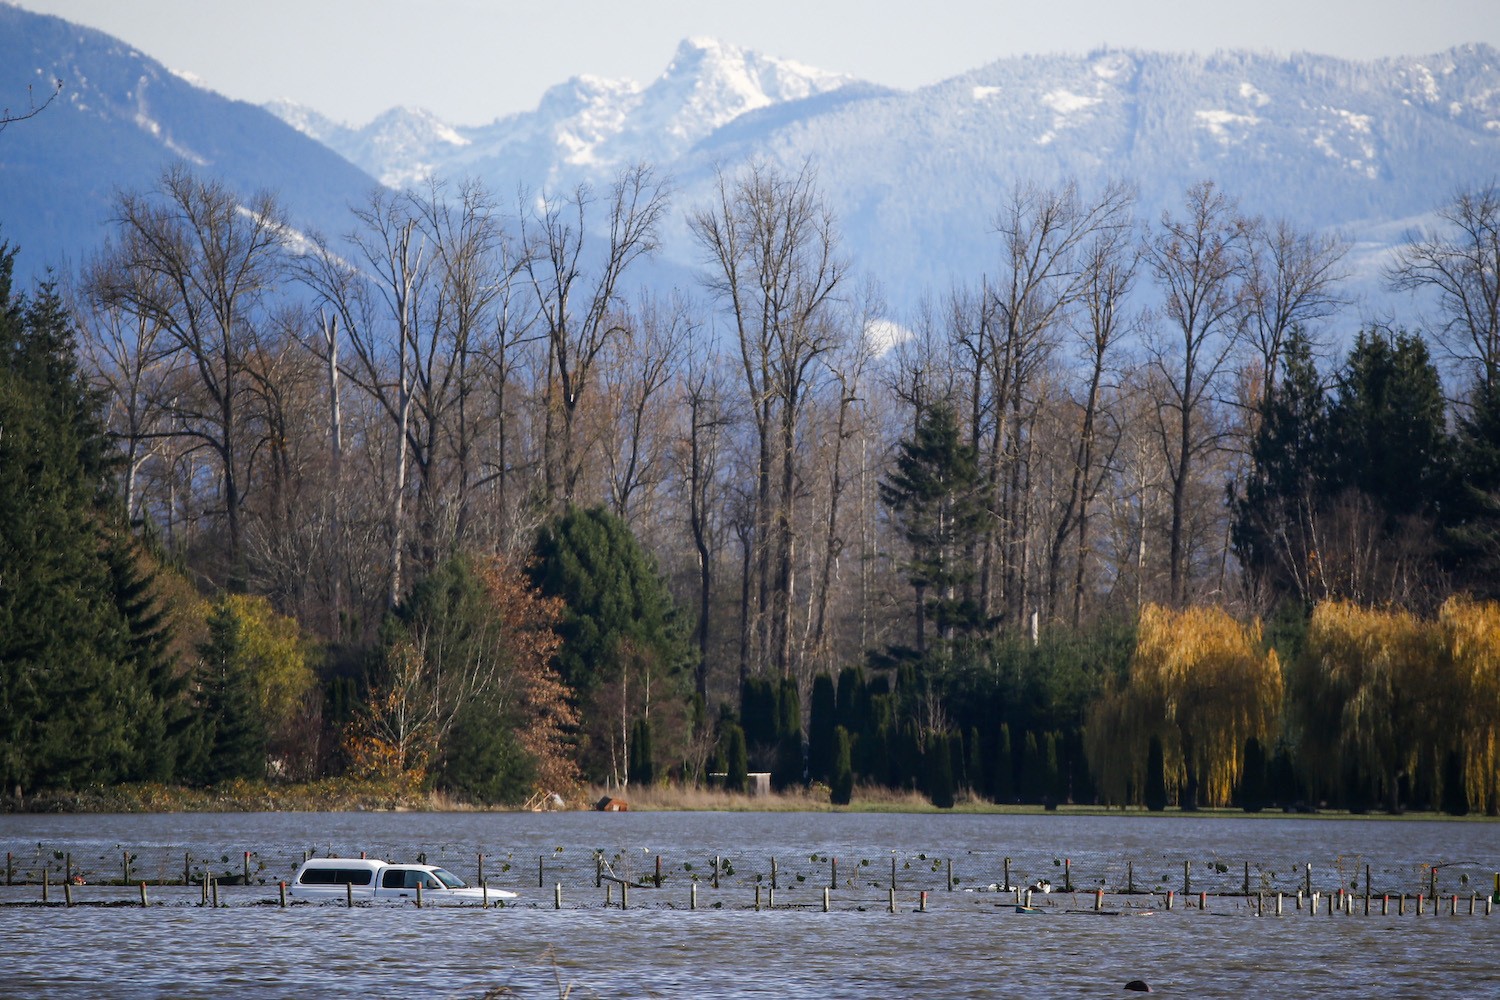 A car is seen partially submerged as floodwaters from the Skagit River inundate farmland outside of Burlington, Washington, on November 17, 2021.